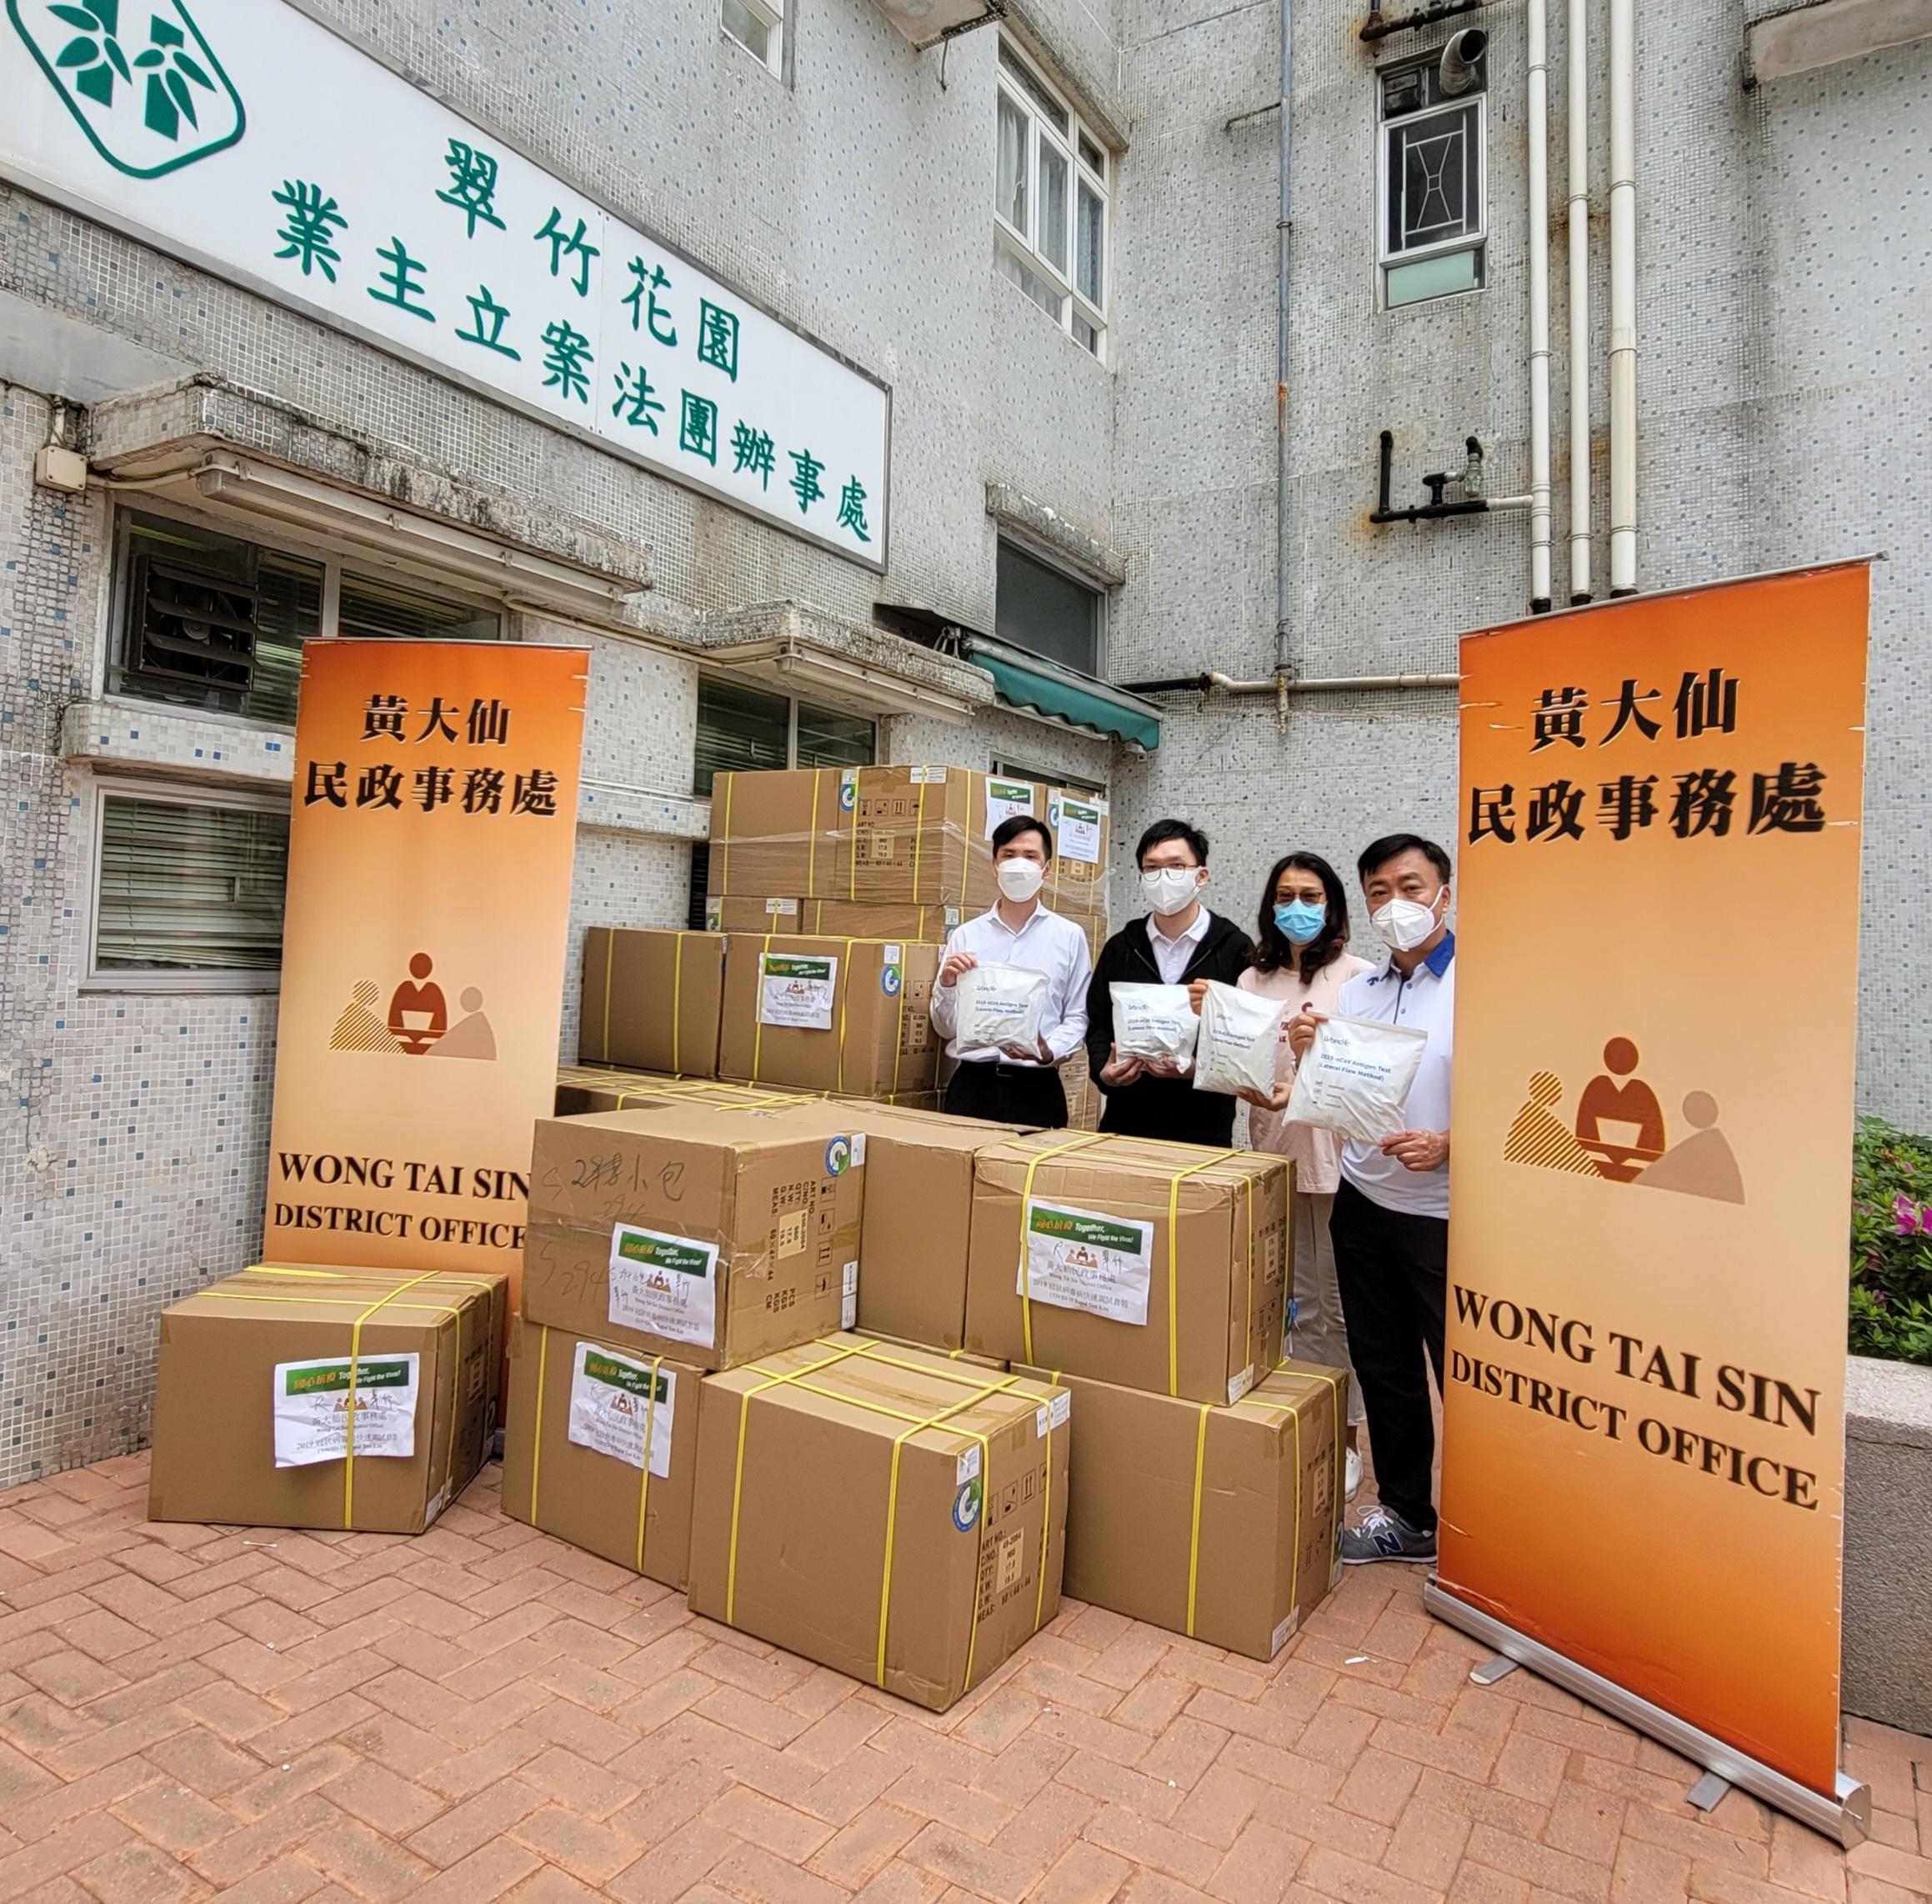 The Wong Tai Sin District Office today (April 28) distributed COVID-19 rapid test kits to households, cleansing workers and property management staff living and working in Tsui Chuk Garden for voluntary testing through the property management company.